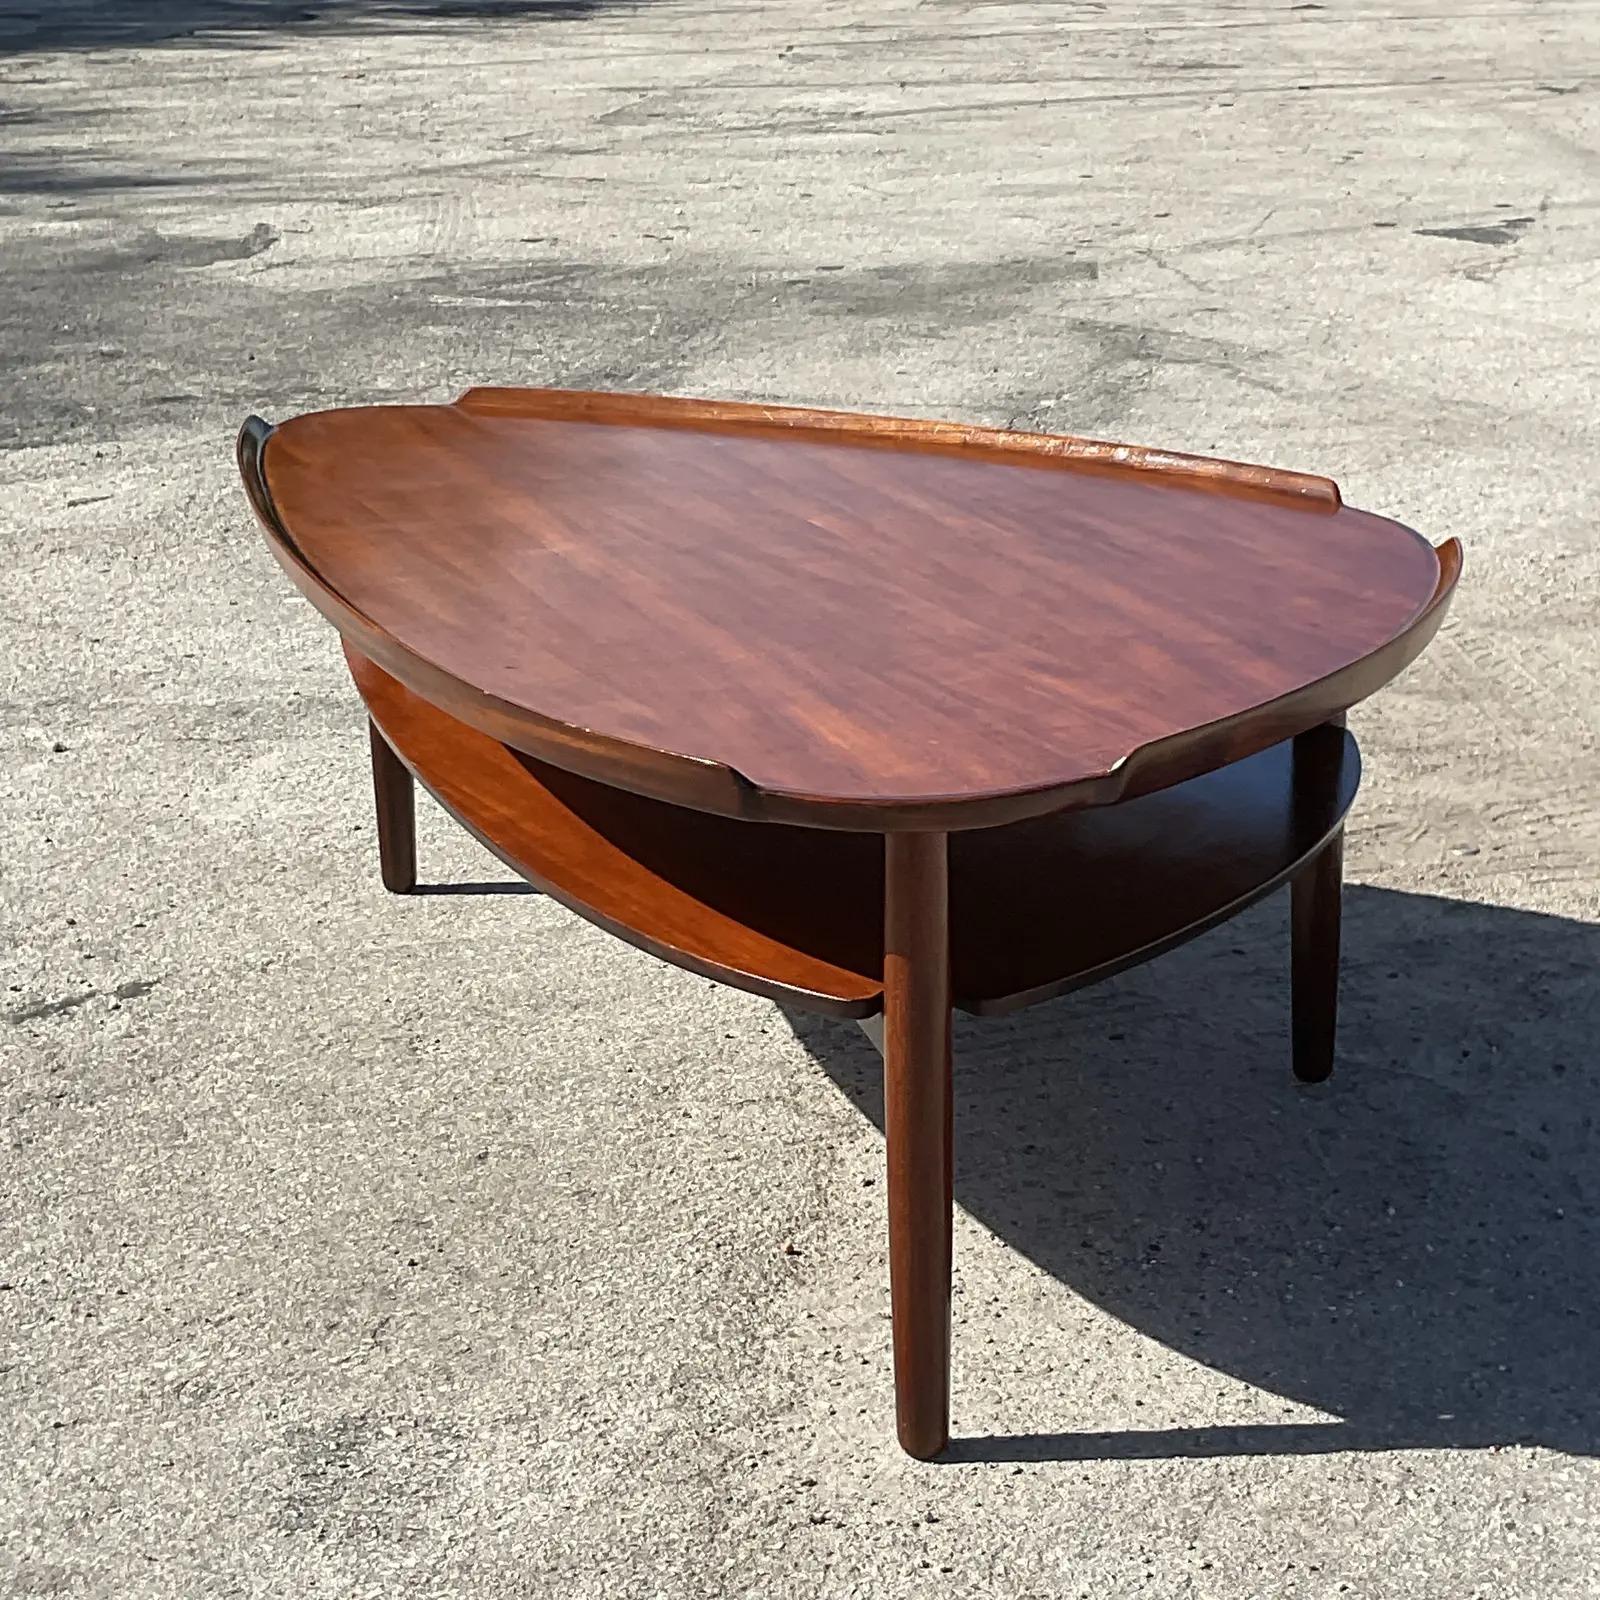 Vintage MCM coffee table. Made by the iconic Yngve Ekstrom for Mobler Sweden. Beautiful biomorphic shape with a bi-level design. Tagged on the bottom. Acquired from a Palm Beach estate.